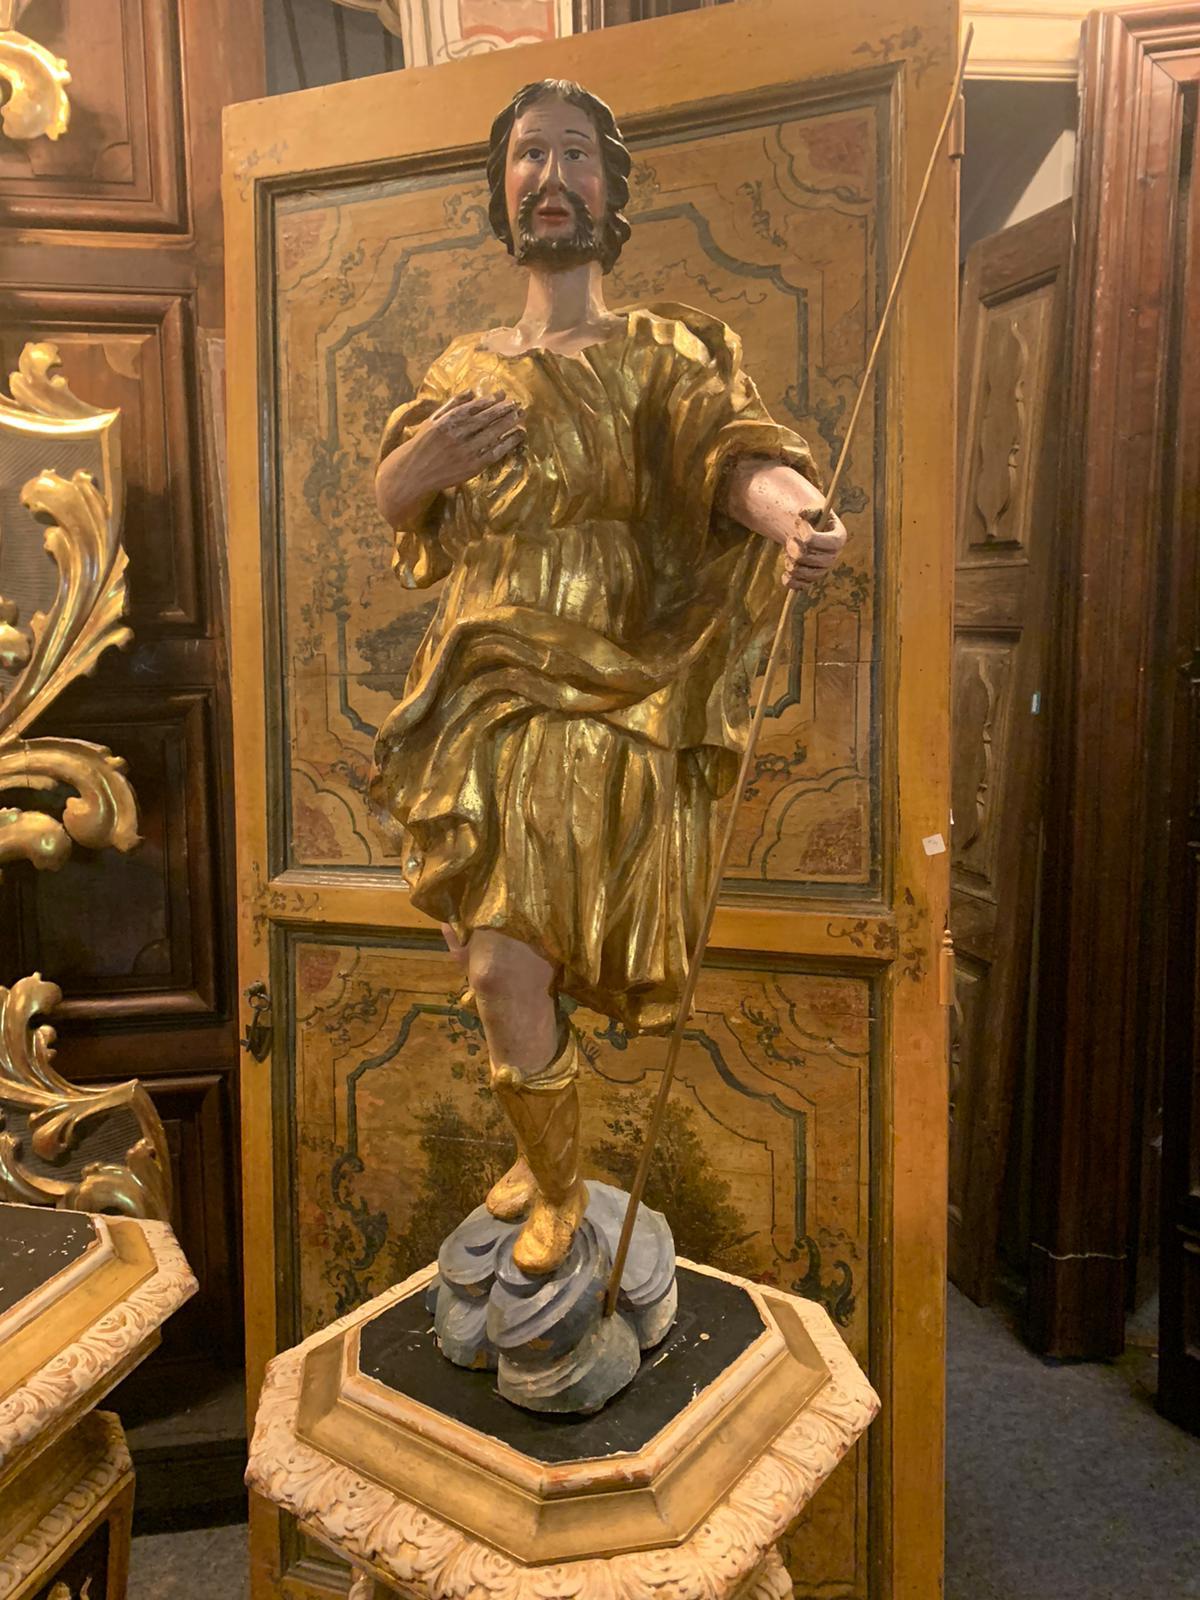 Italian Antique Polychrome and Gilded Wooden Statue, Late 18th Century Italy